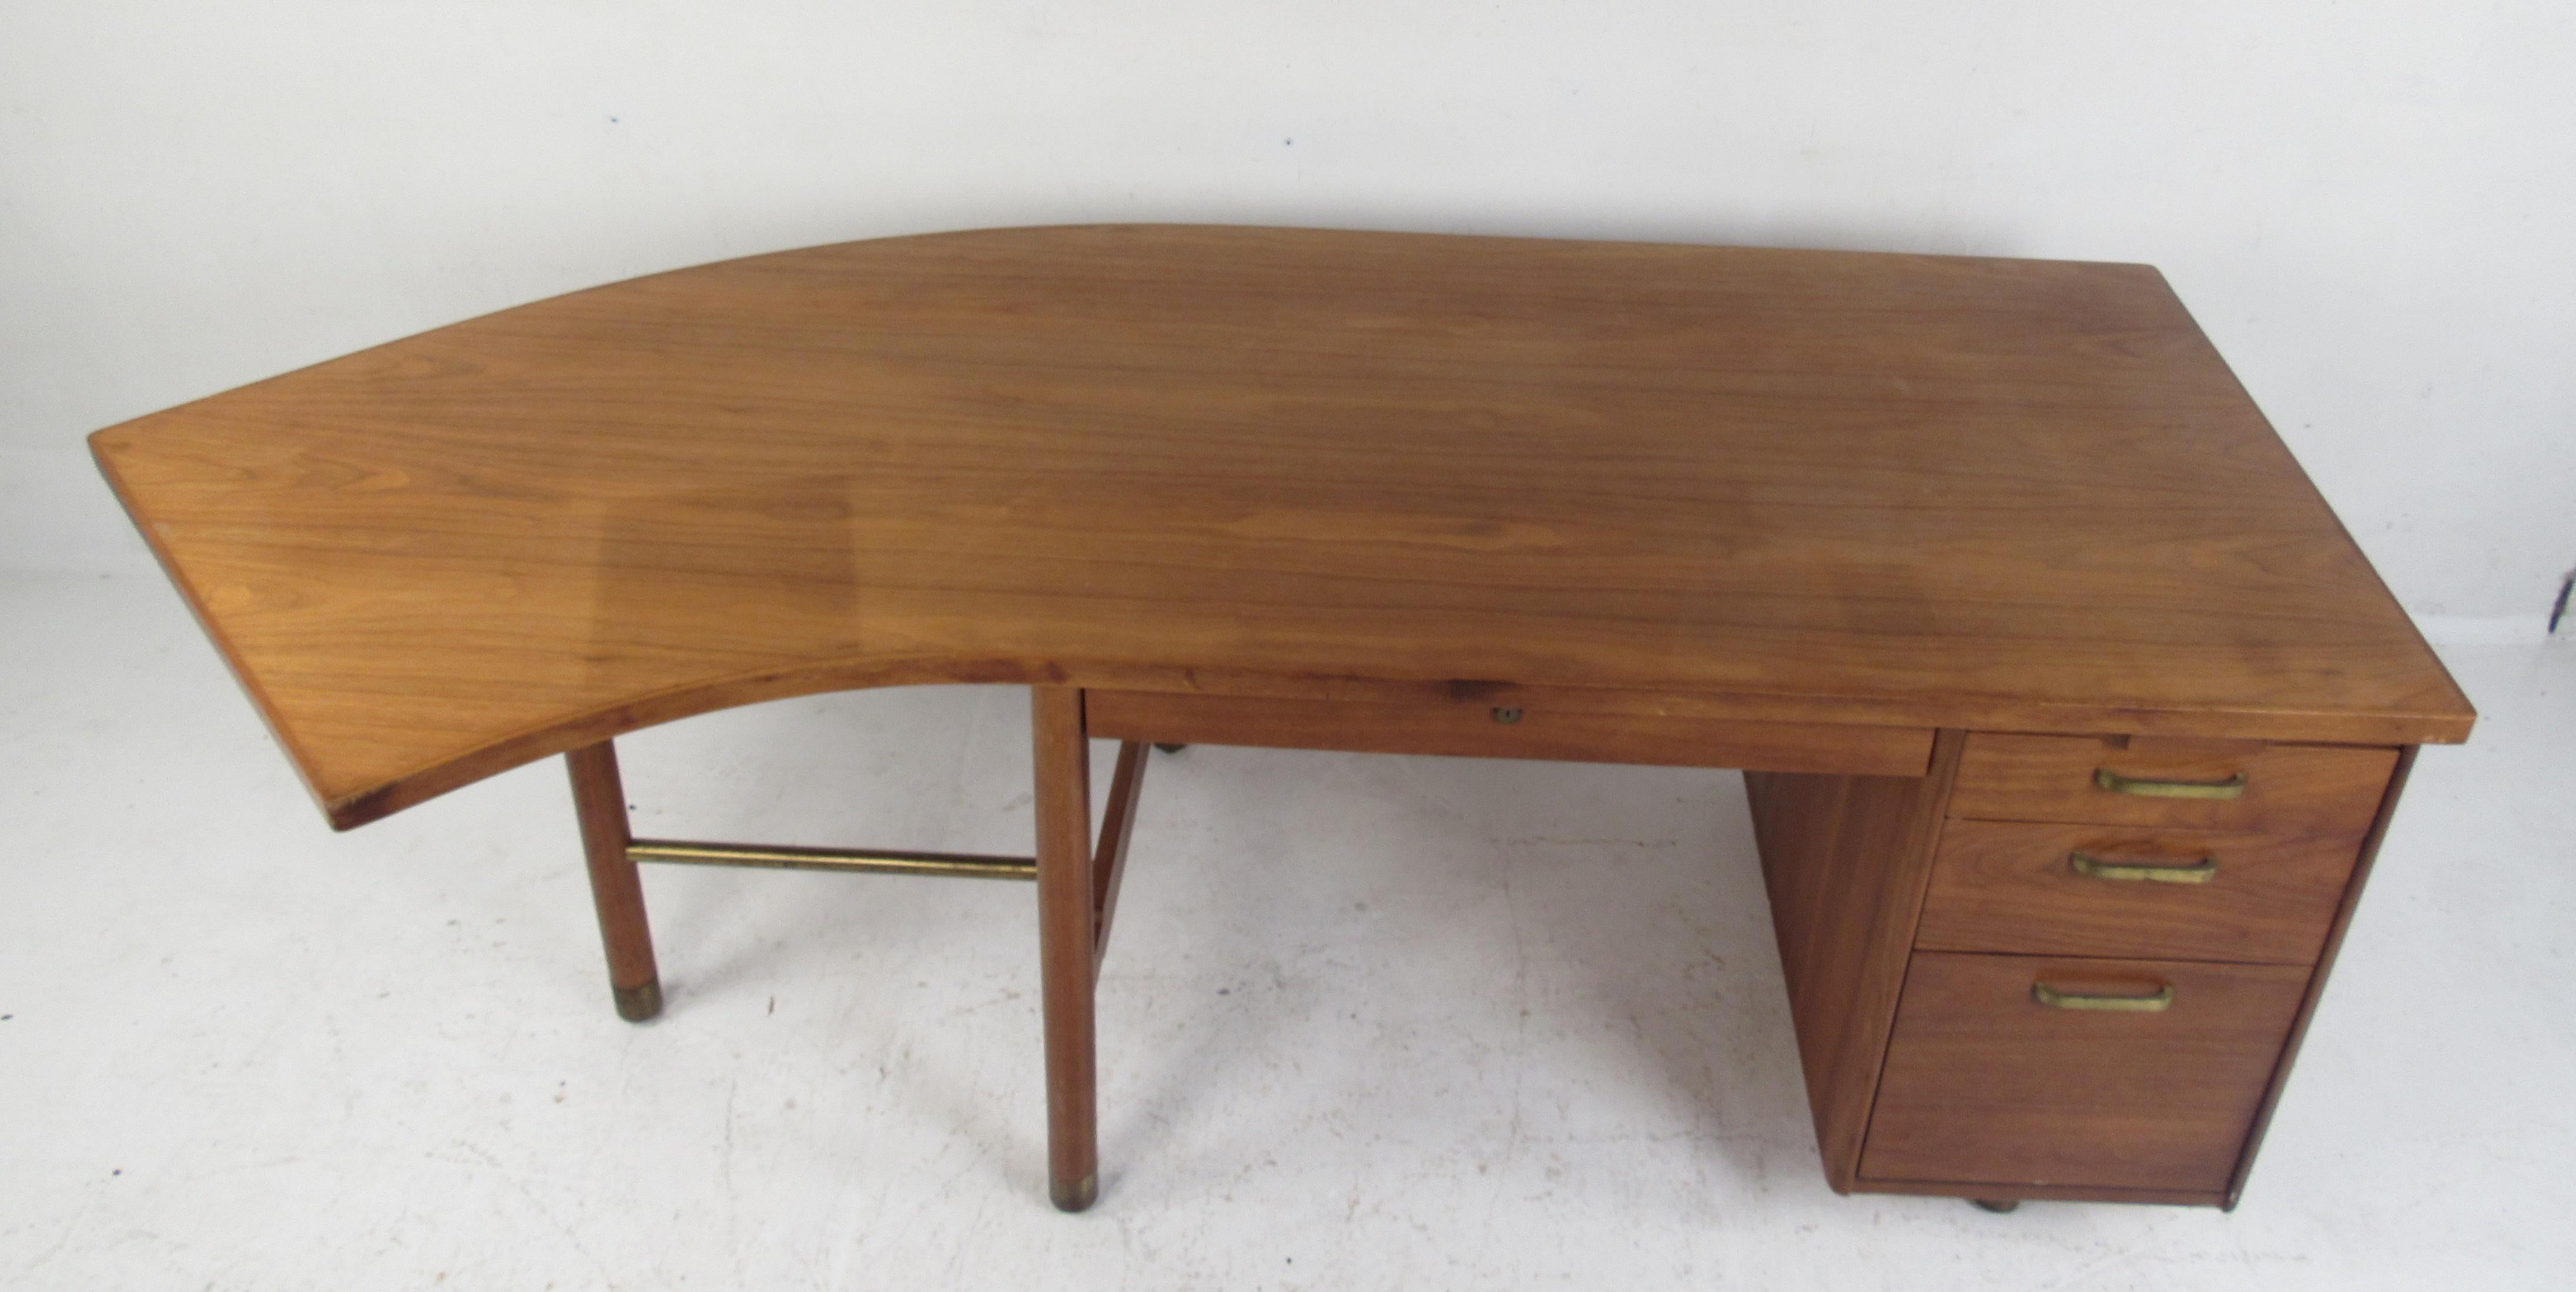 This stunning vintage modern desk features an unusual curved top offering plenty of work space. Quality construction with a finished back and charming walnut wood grain. This wonderful mid-century case piece has ample storage space within its four